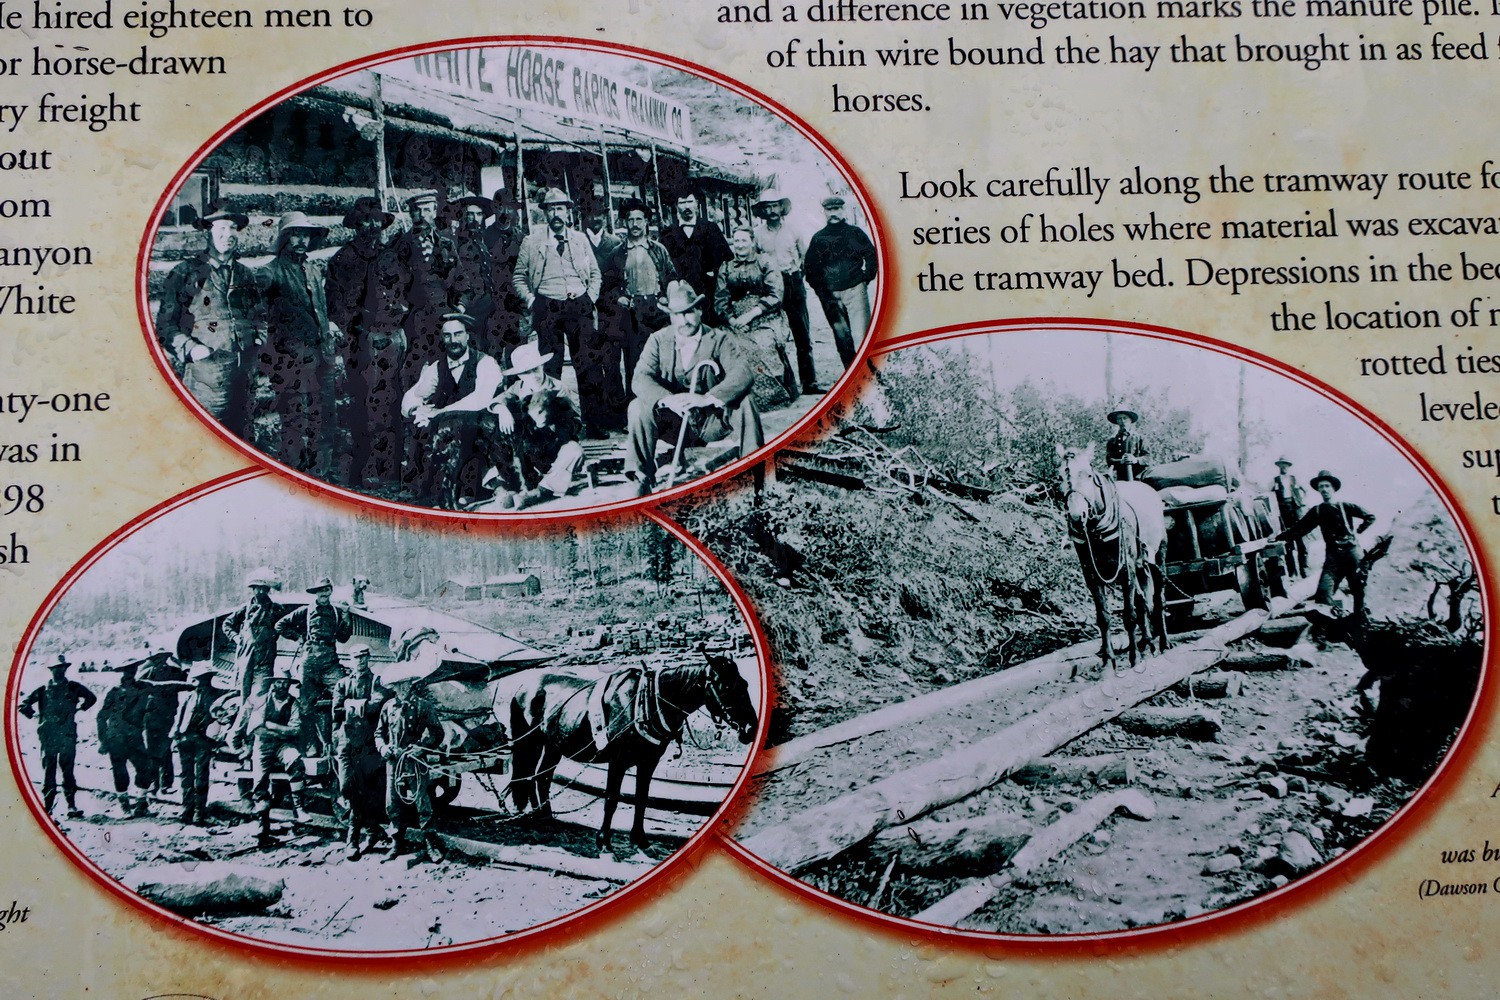 Canyon City was important during the Klondike Gold Rush